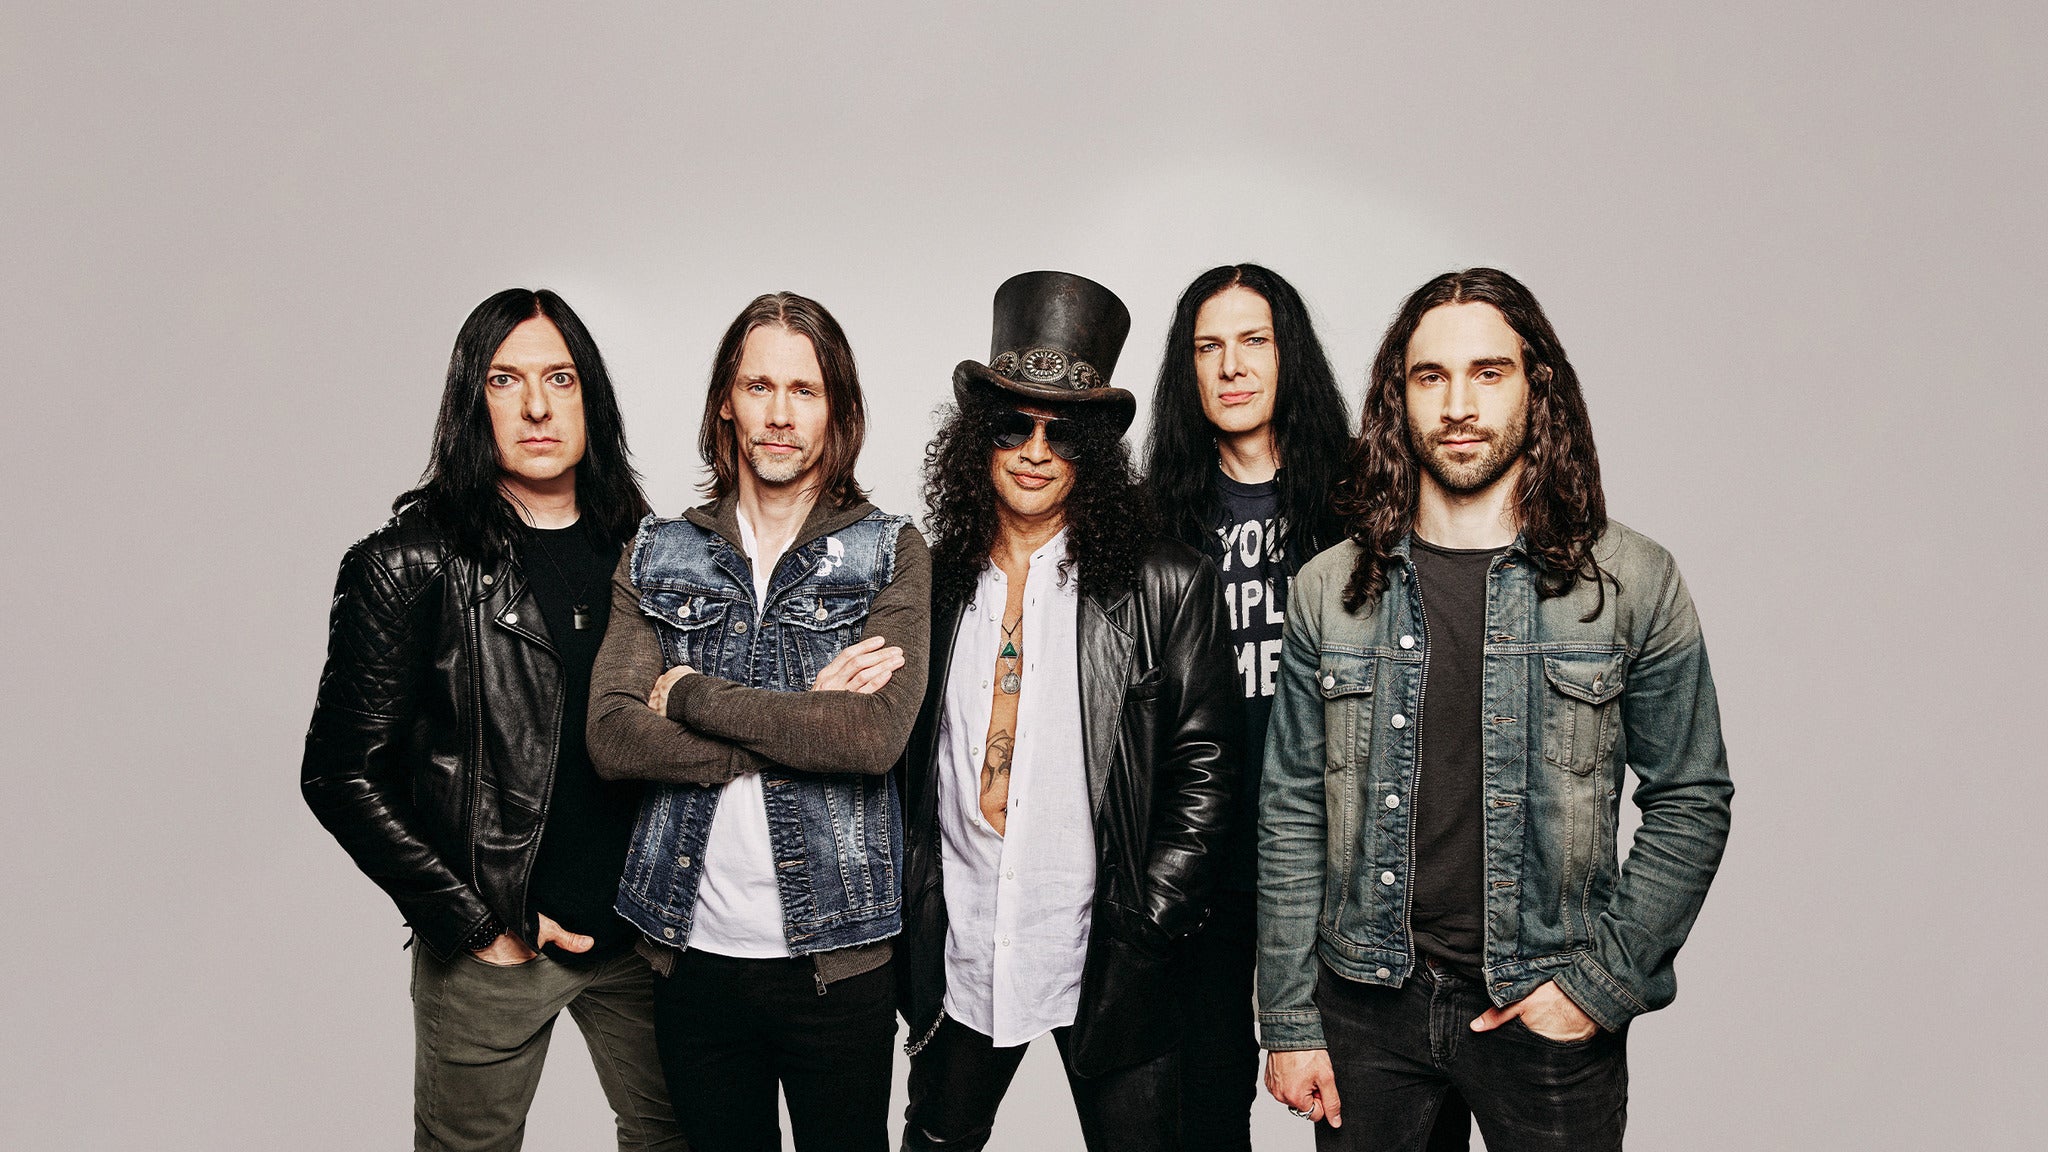 Slash featuring Myles Kennedy and The Conspirators in Atlanta promo photo for Fan presale offer code